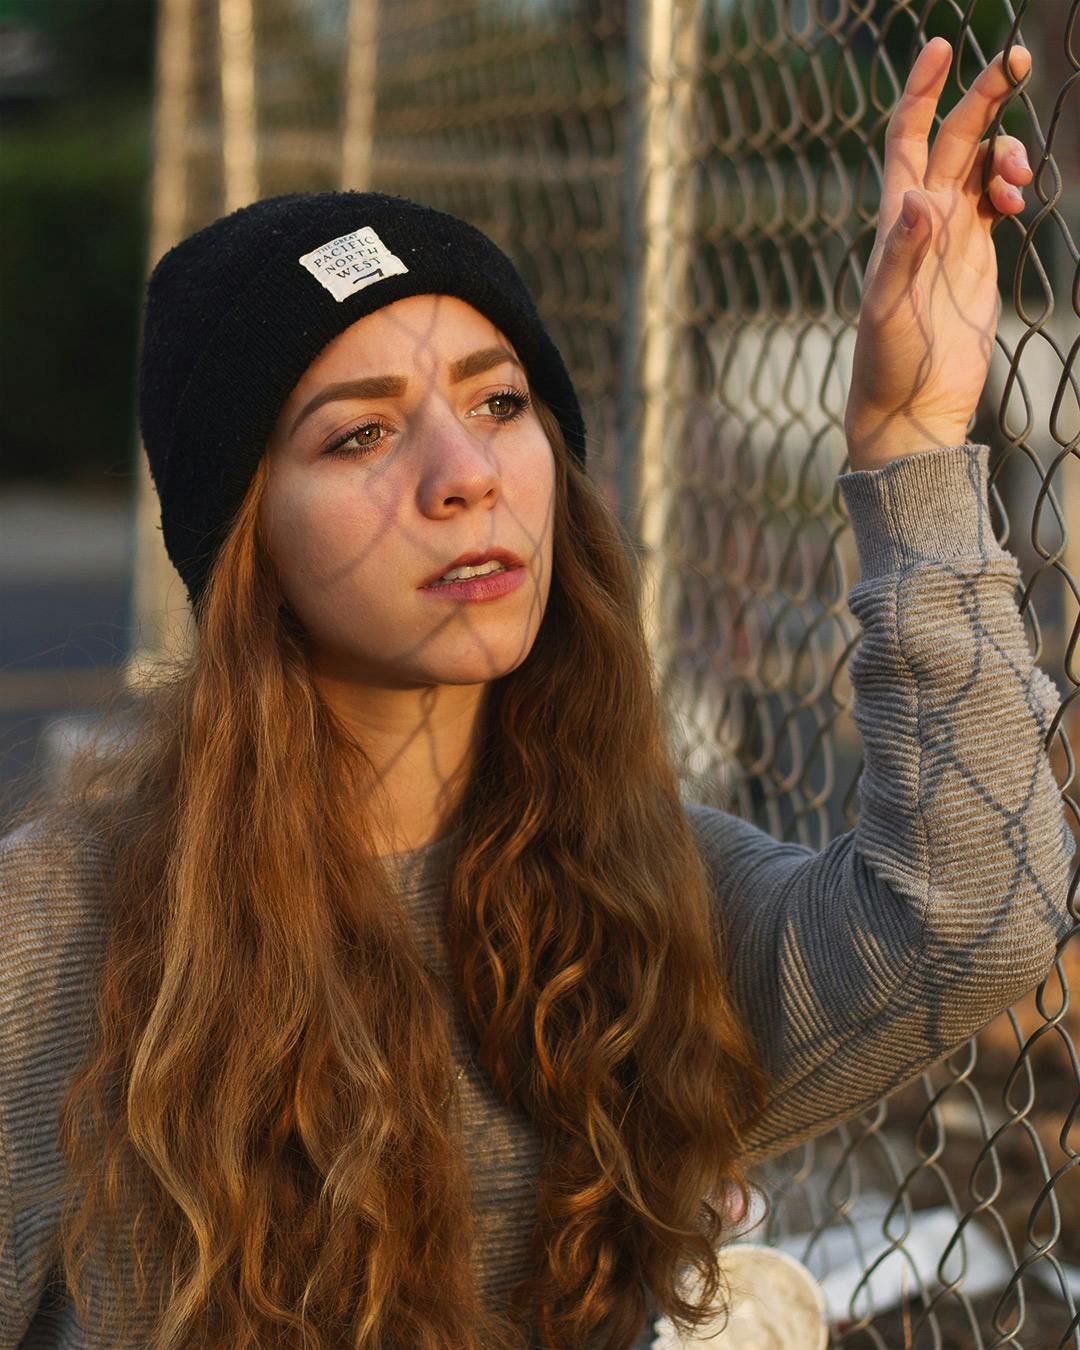 Girl in beanie against fence during golden hour.